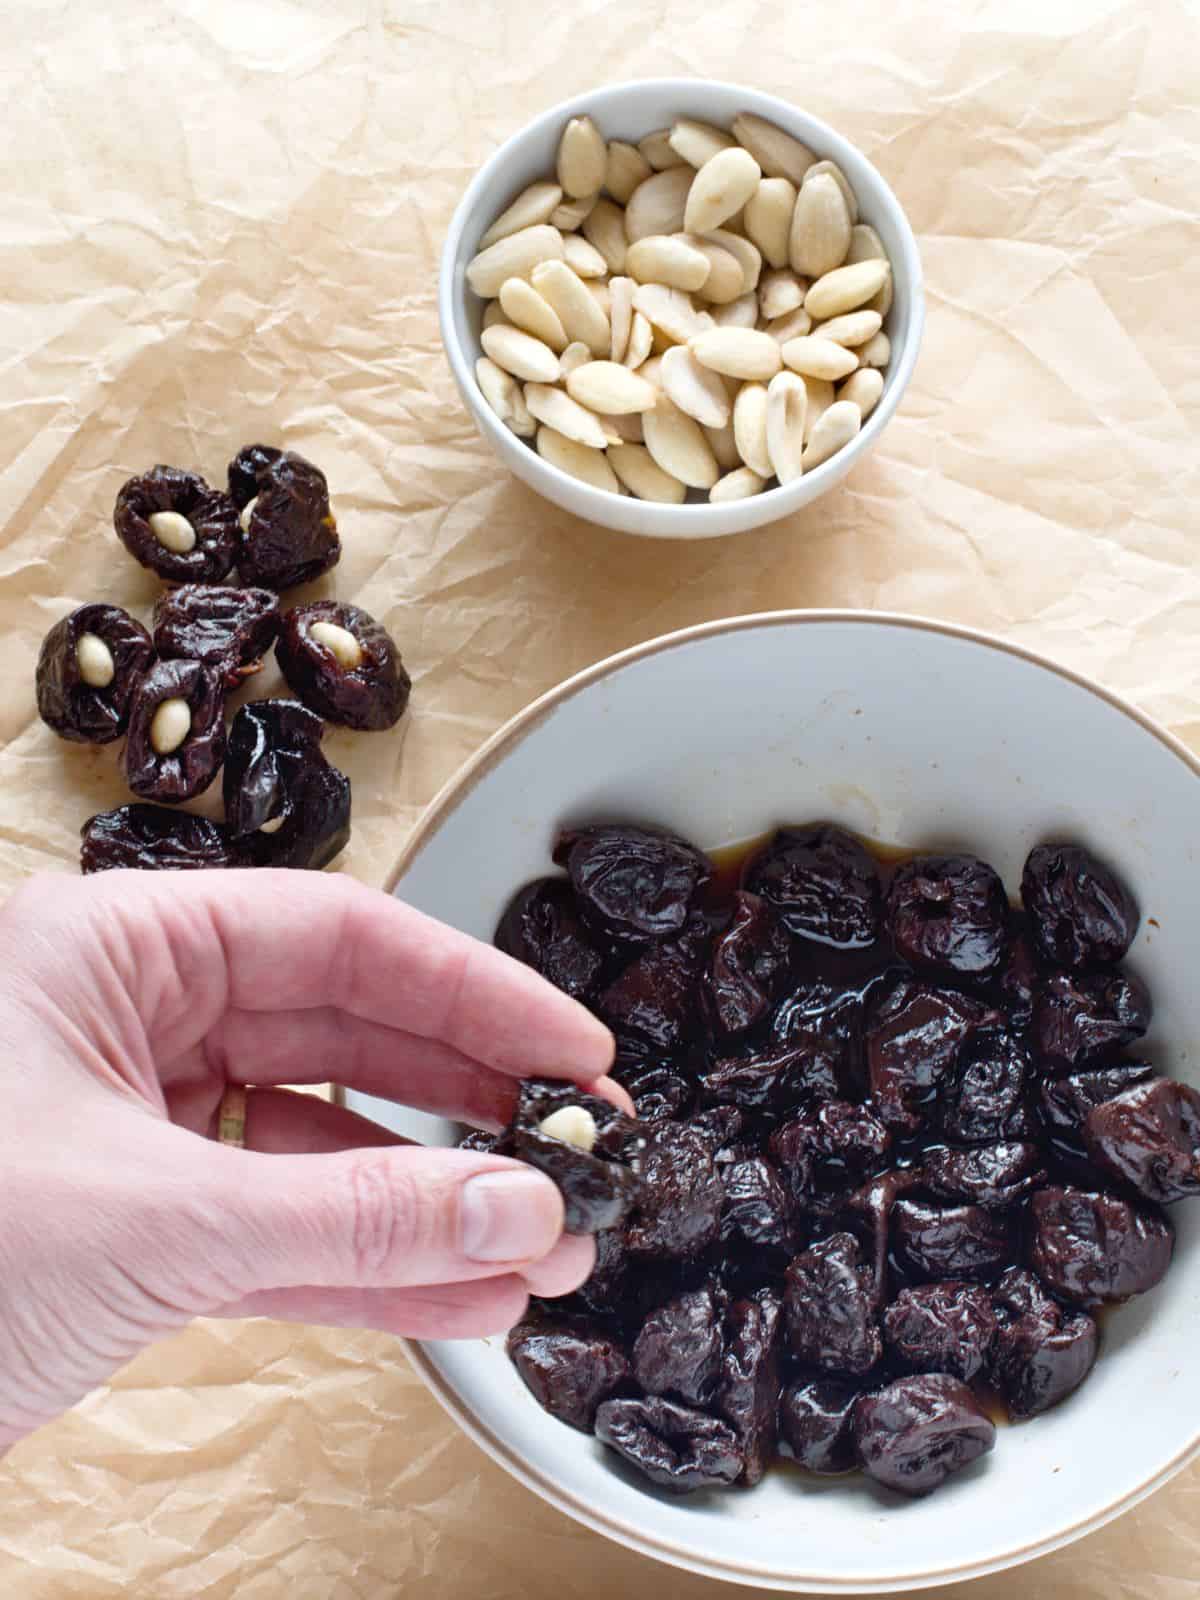 Stuffing prunes with almonds.